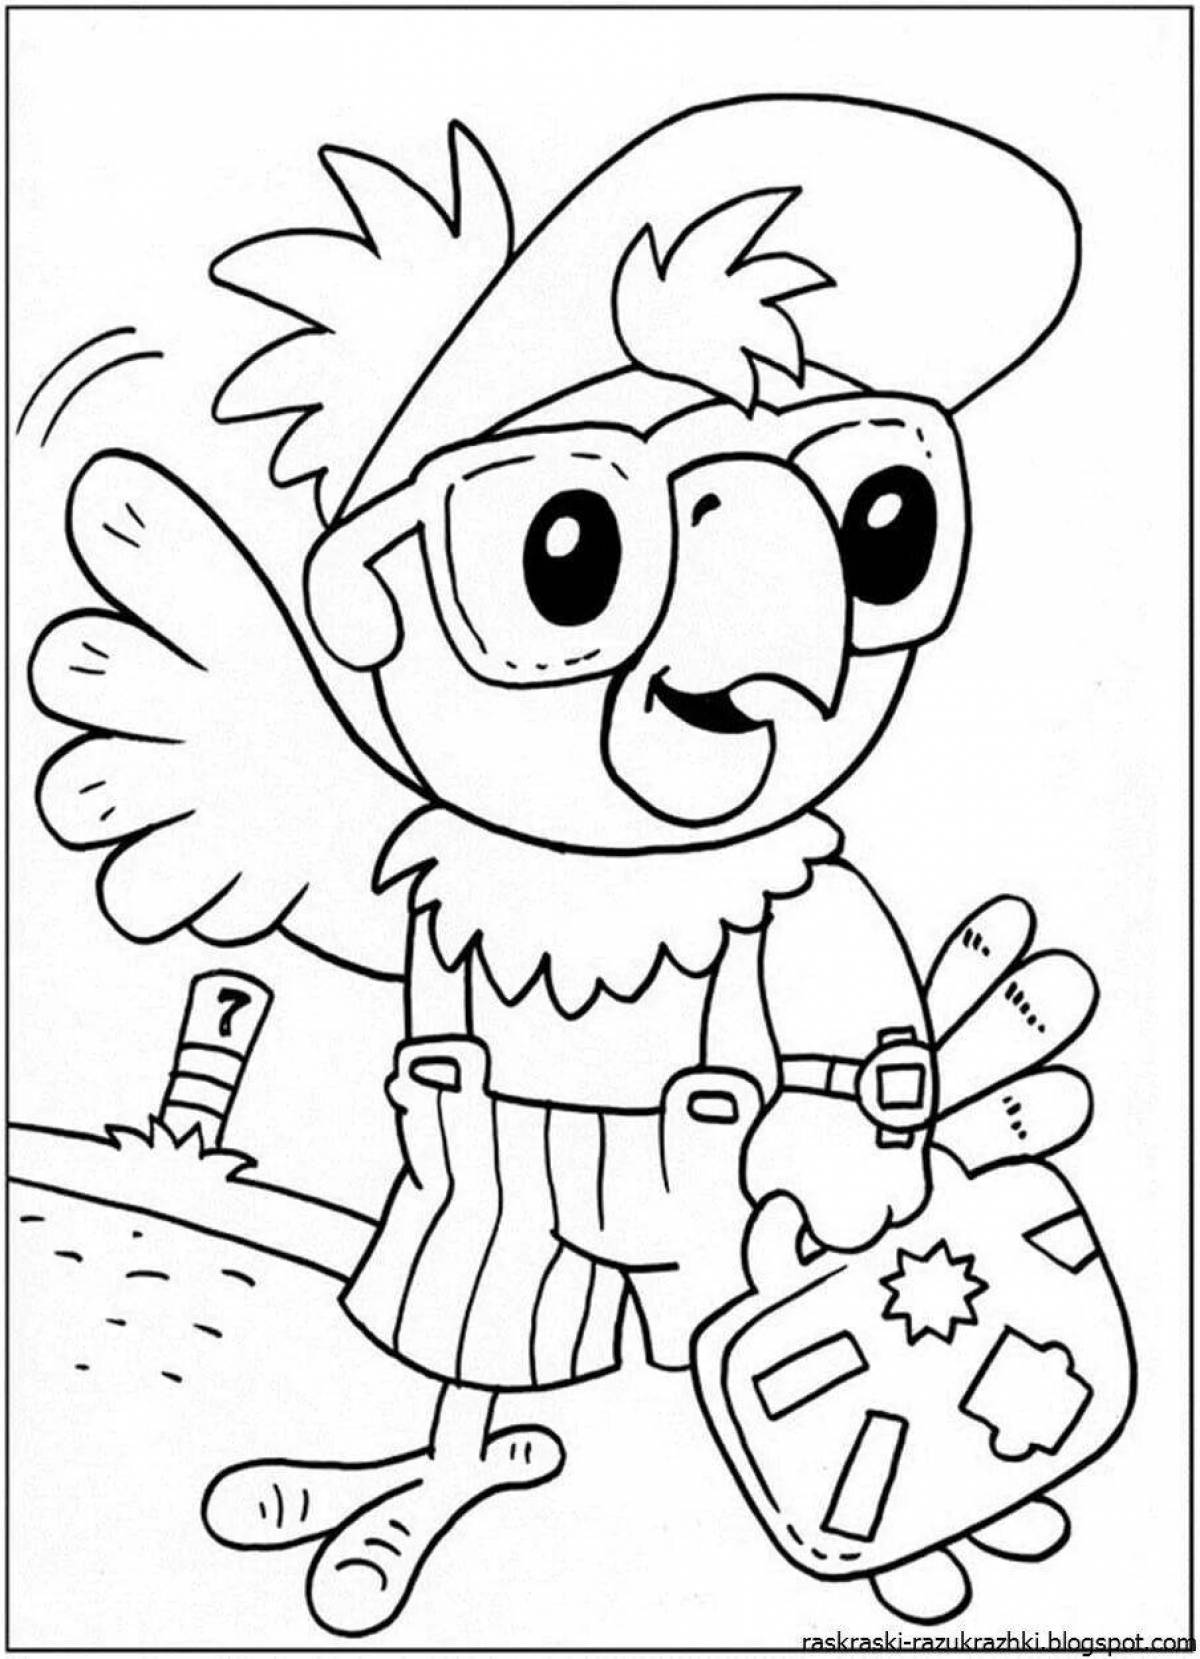 Coloring for cute cartoon characters for 4-5 year olds